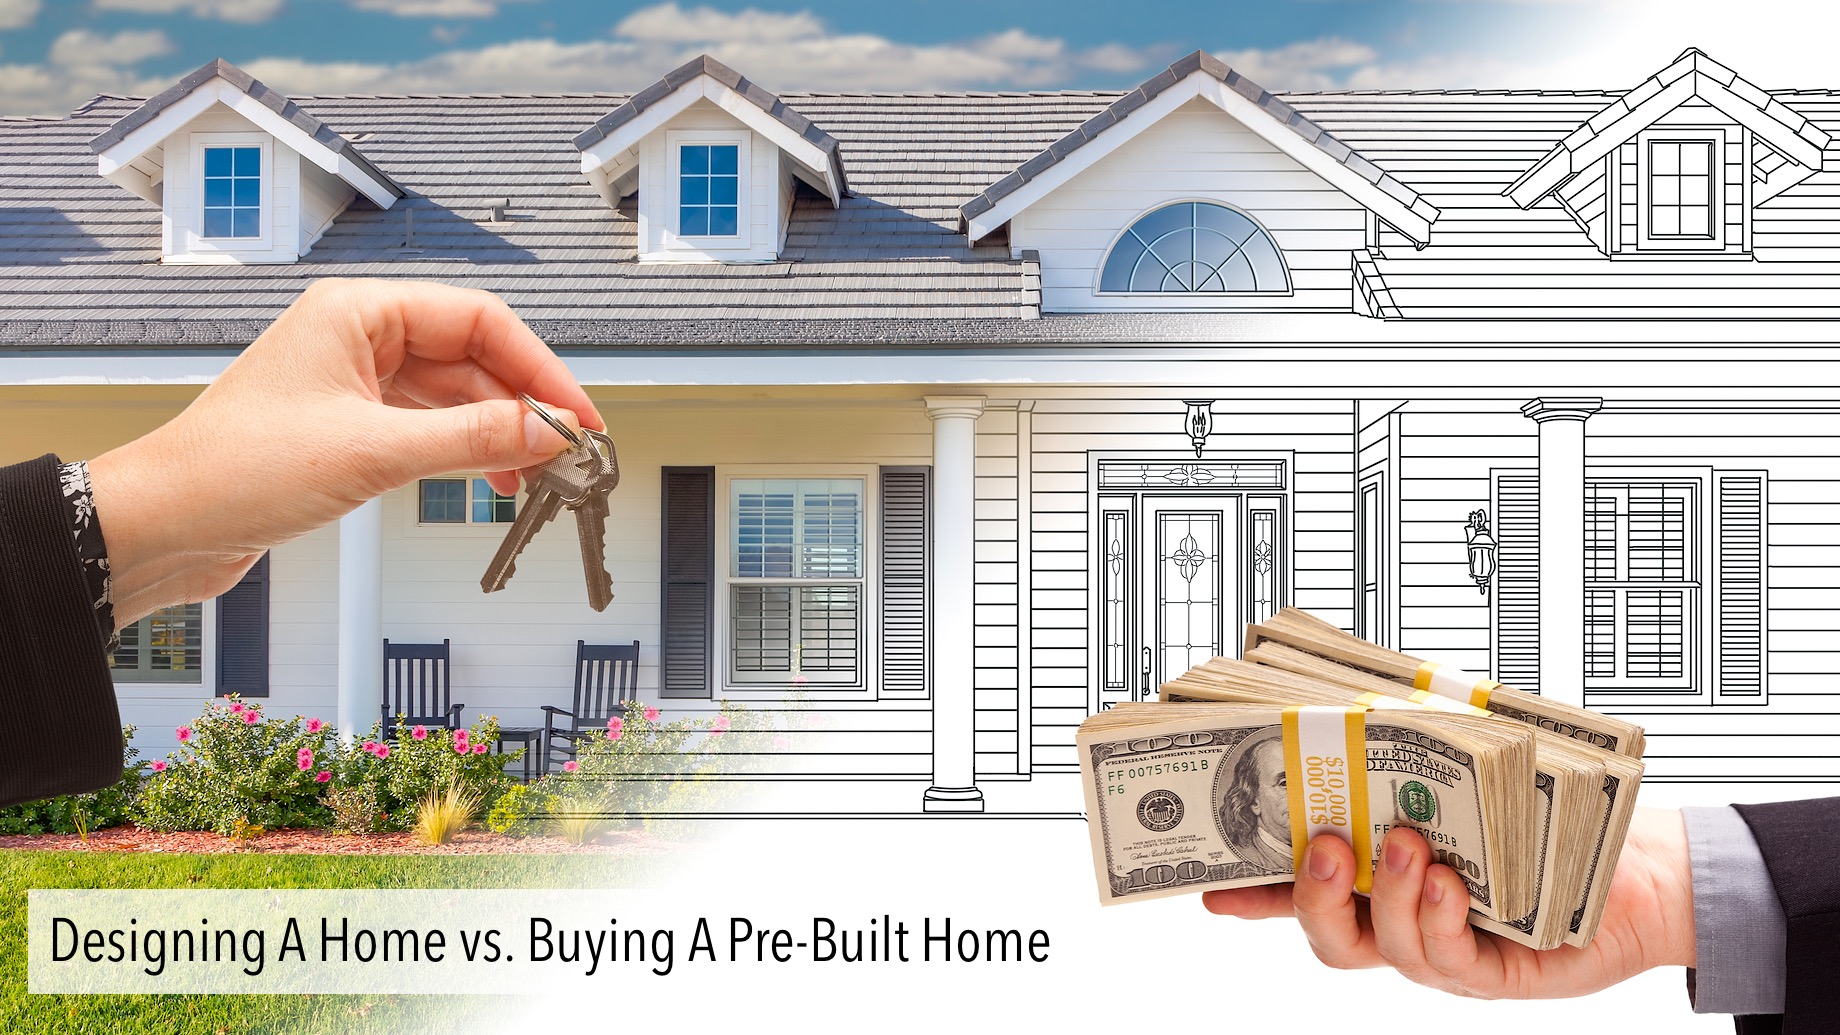 Designing A Home vs. Buying A Pre-Built Home